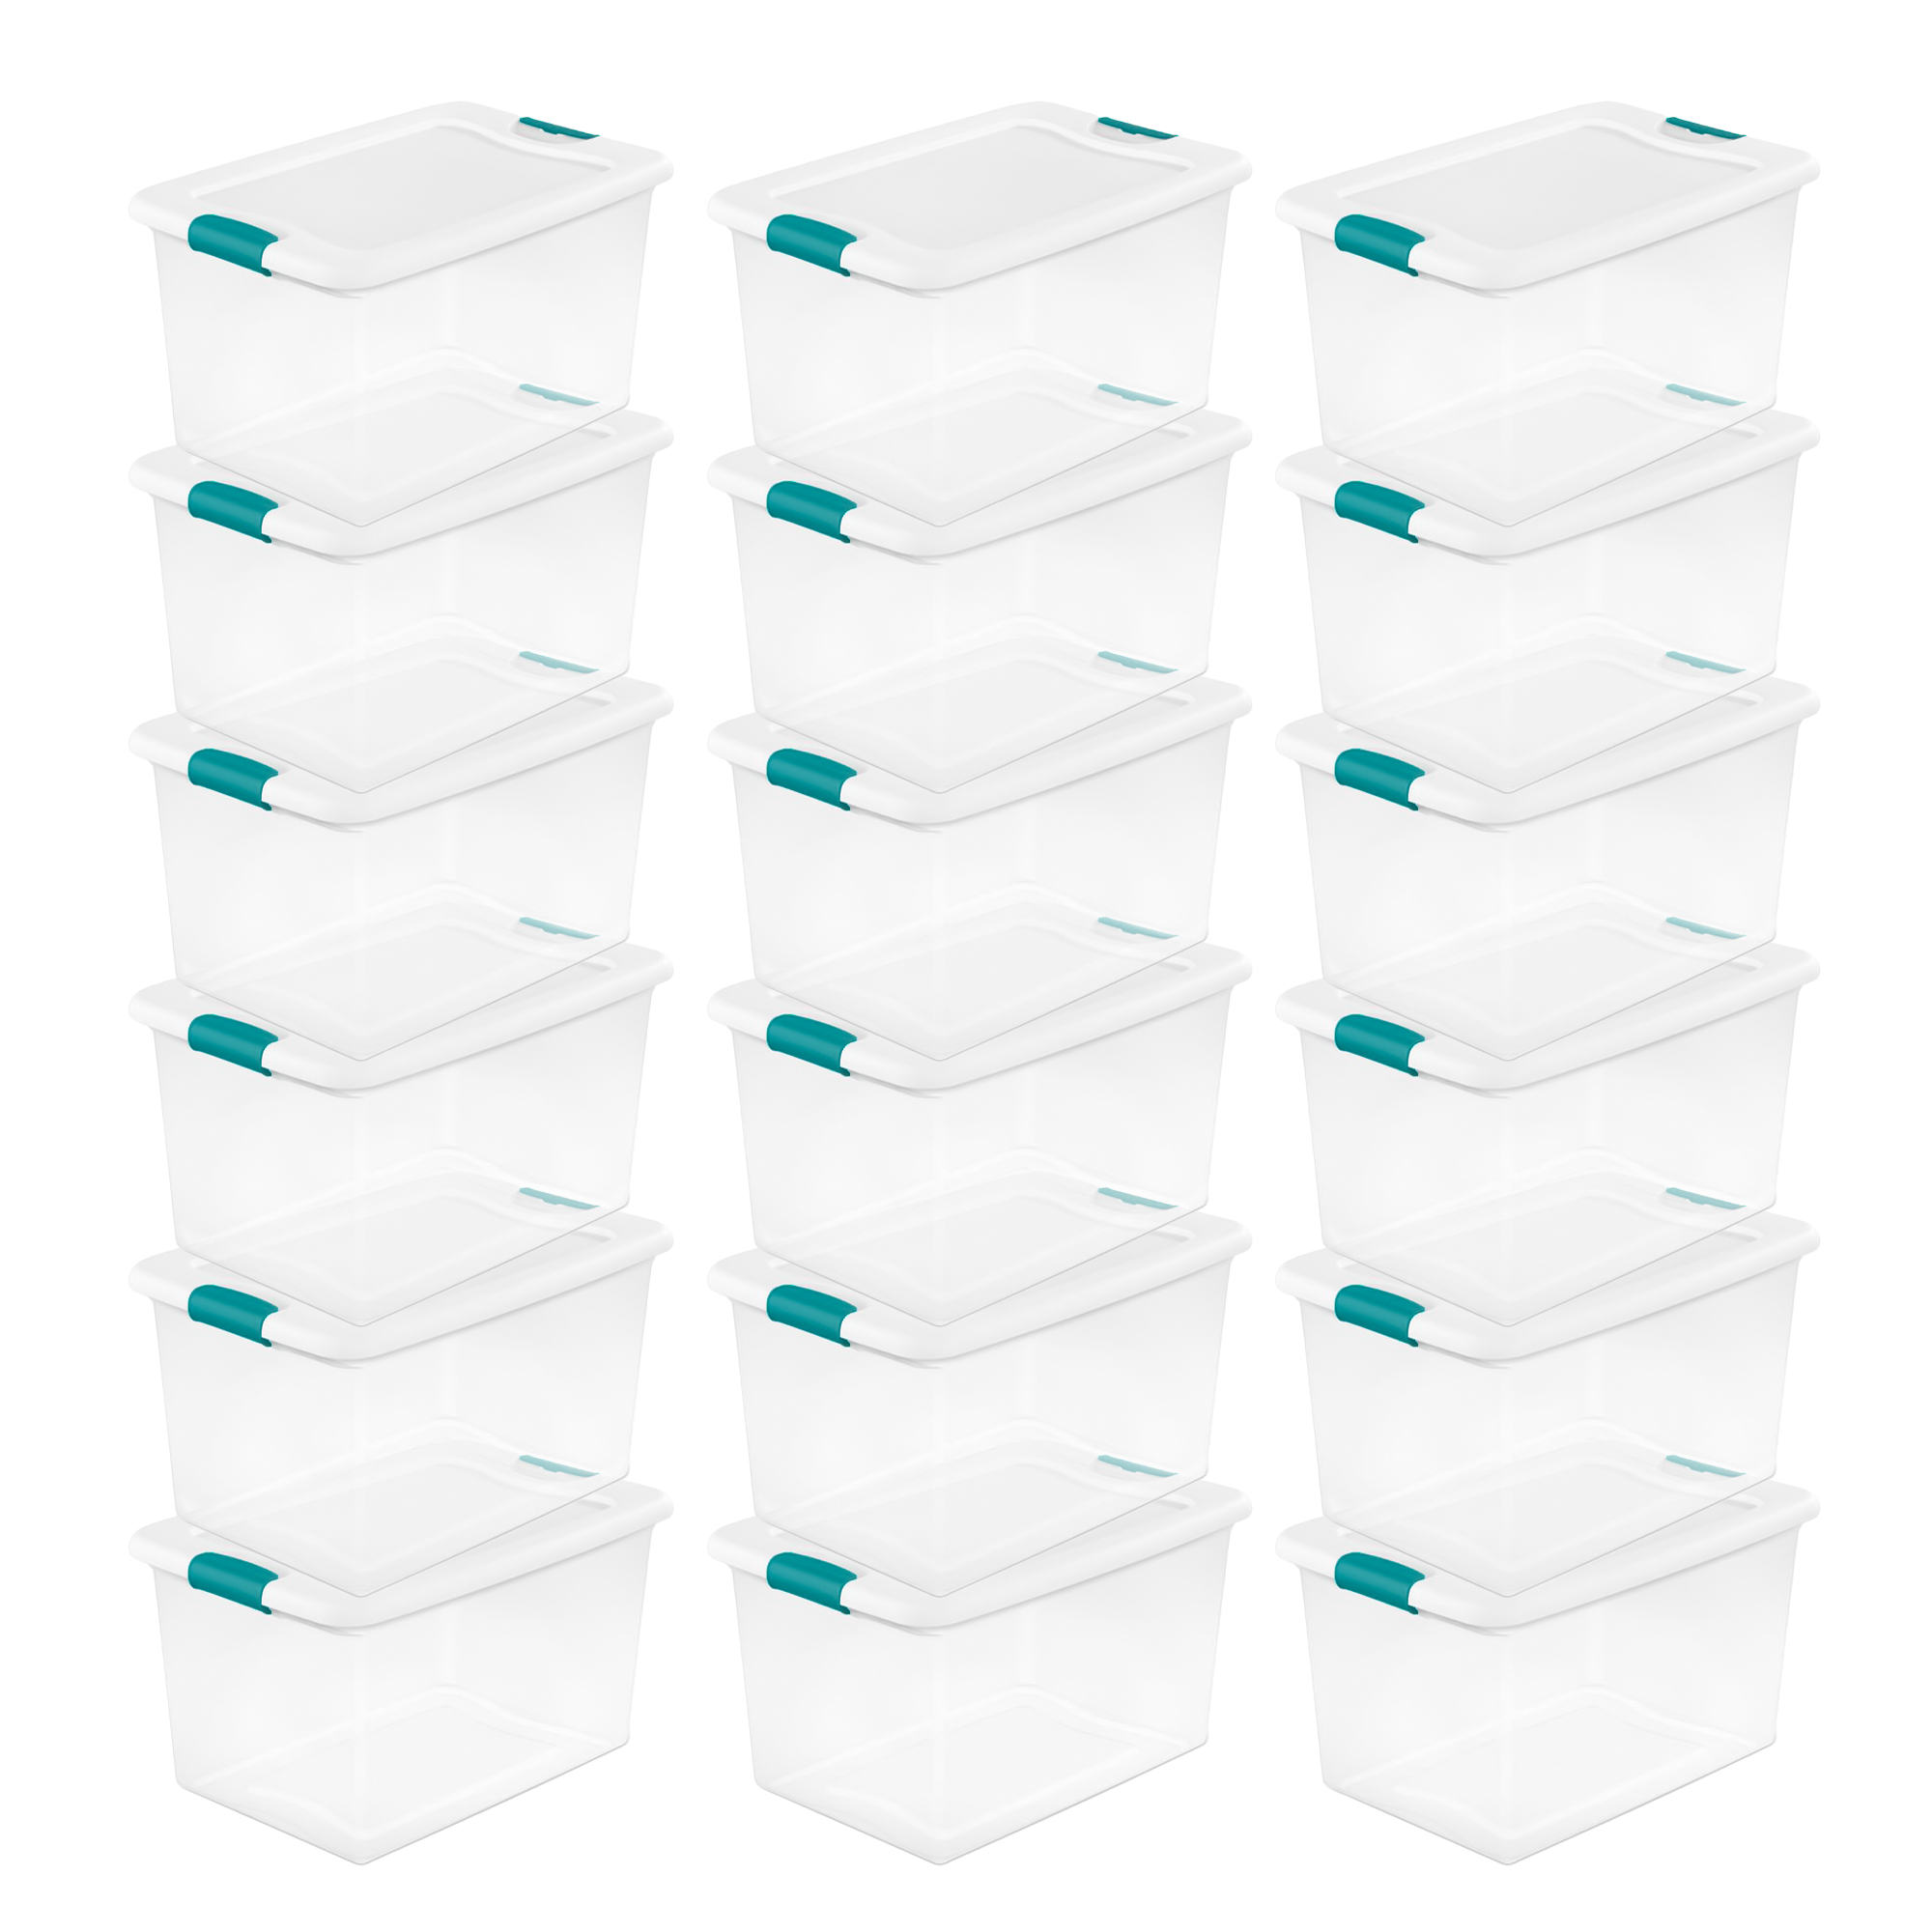 Sterilite 64 Quart Clear Plastic Storage Bin with White Latch Lid, 18 Pack - image 1 of 11